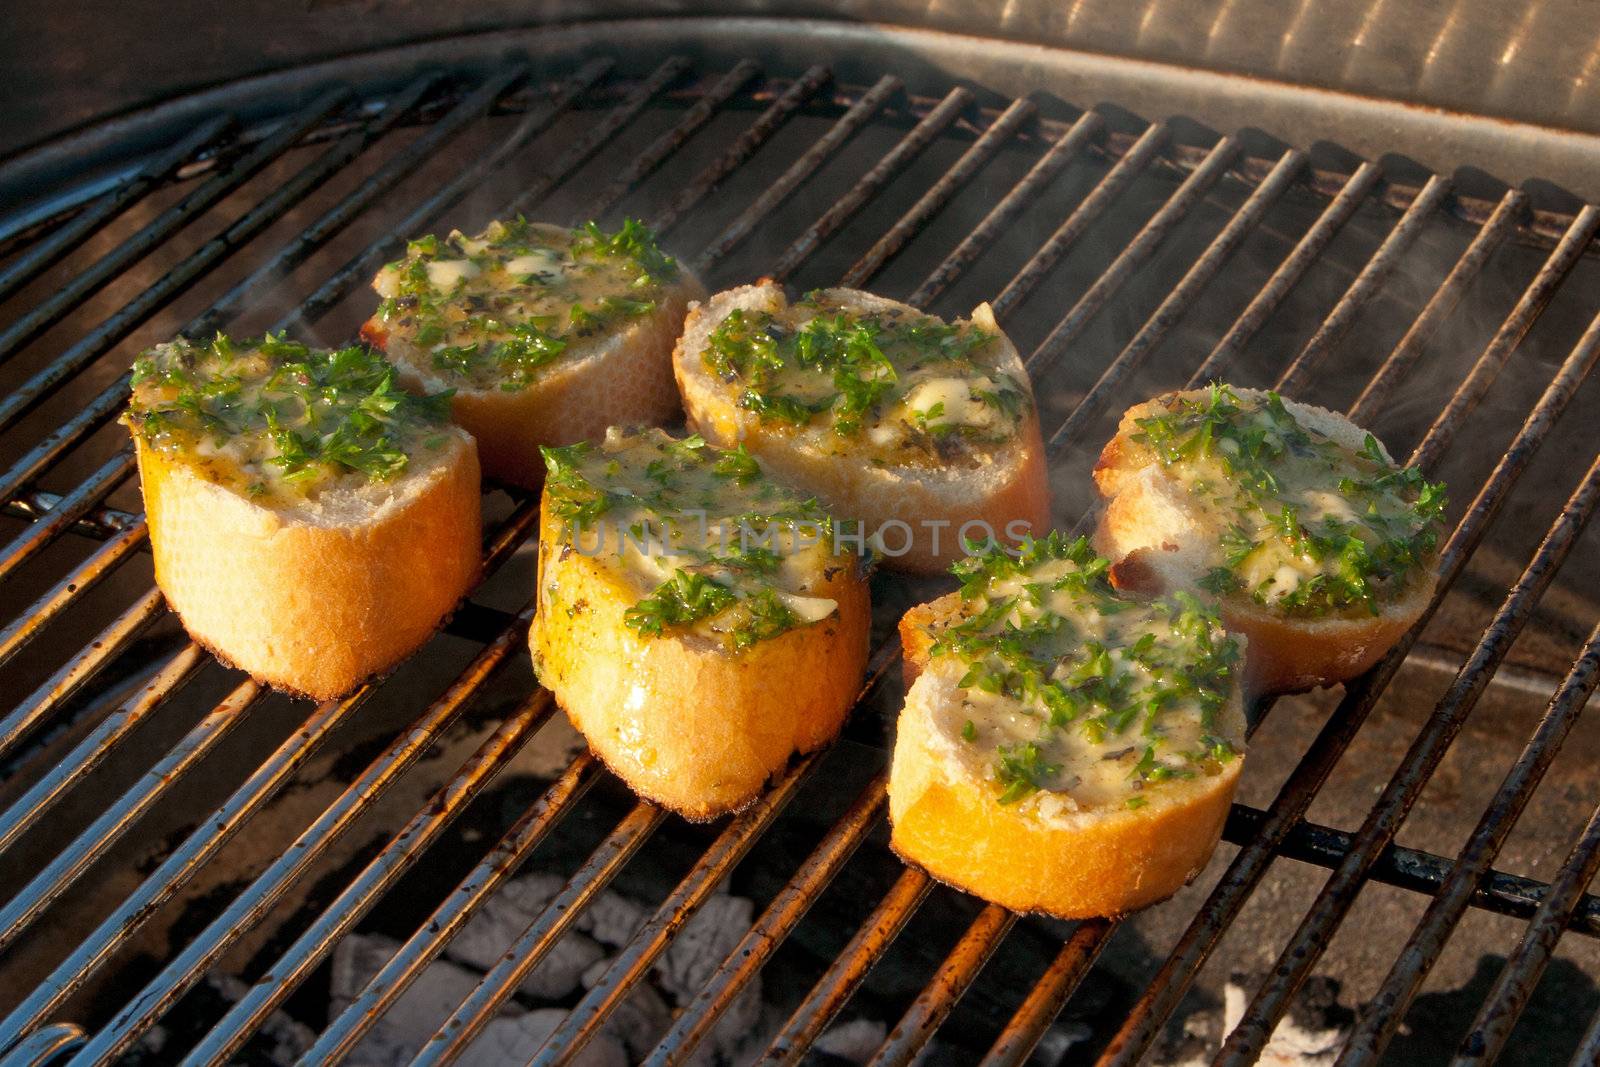 Cooking Garlic Breads on a Barbecue outside in the garden